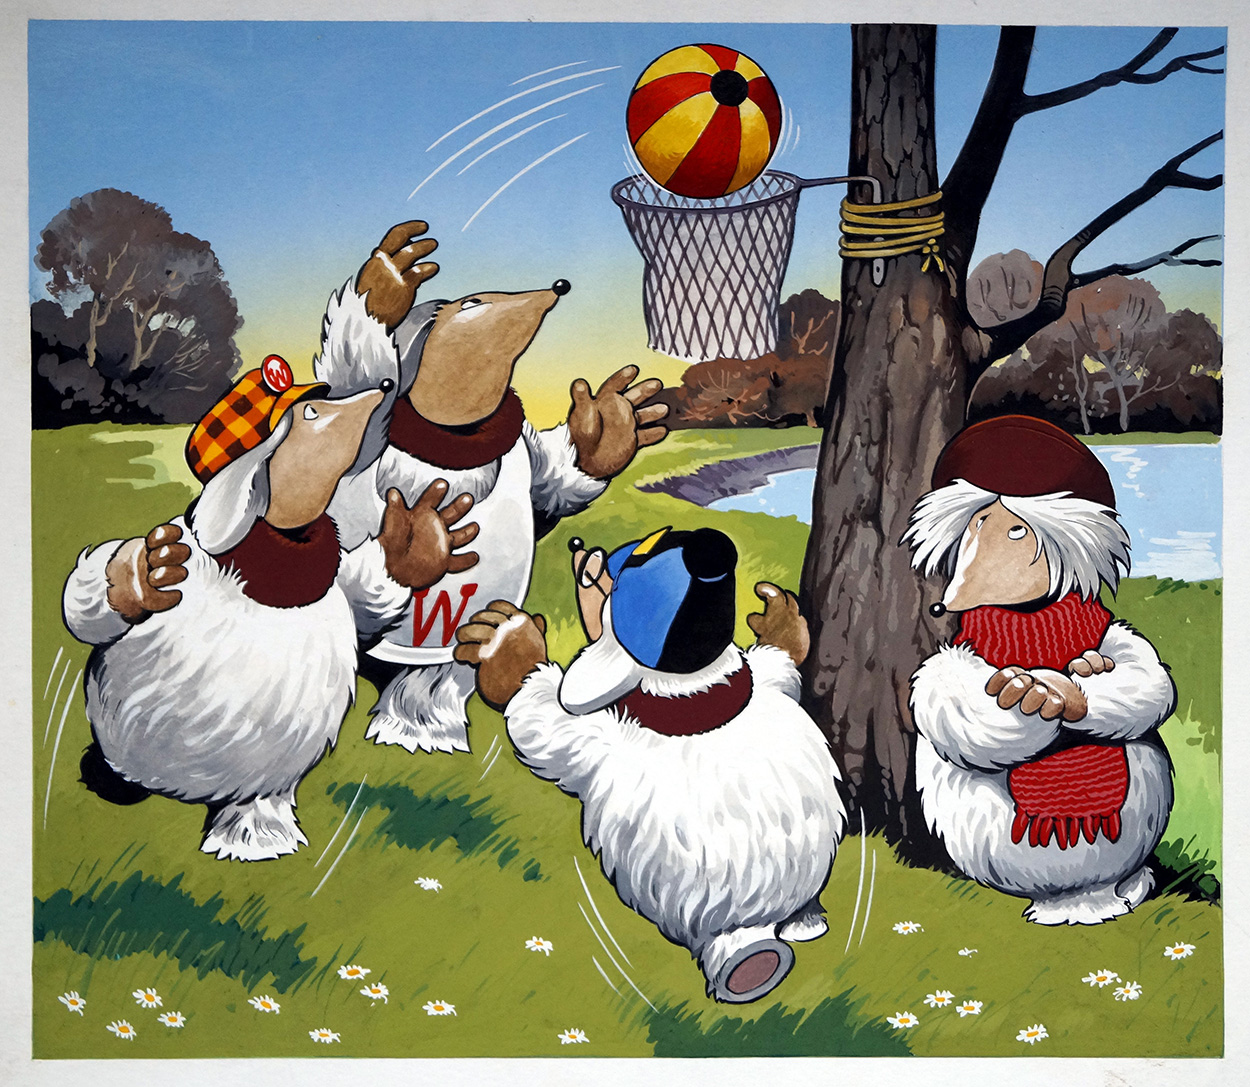 The Wombles: Netball (TWO pages) (Originals) art by The Wombles (Blasco) Art at The Illustration Art Gallery